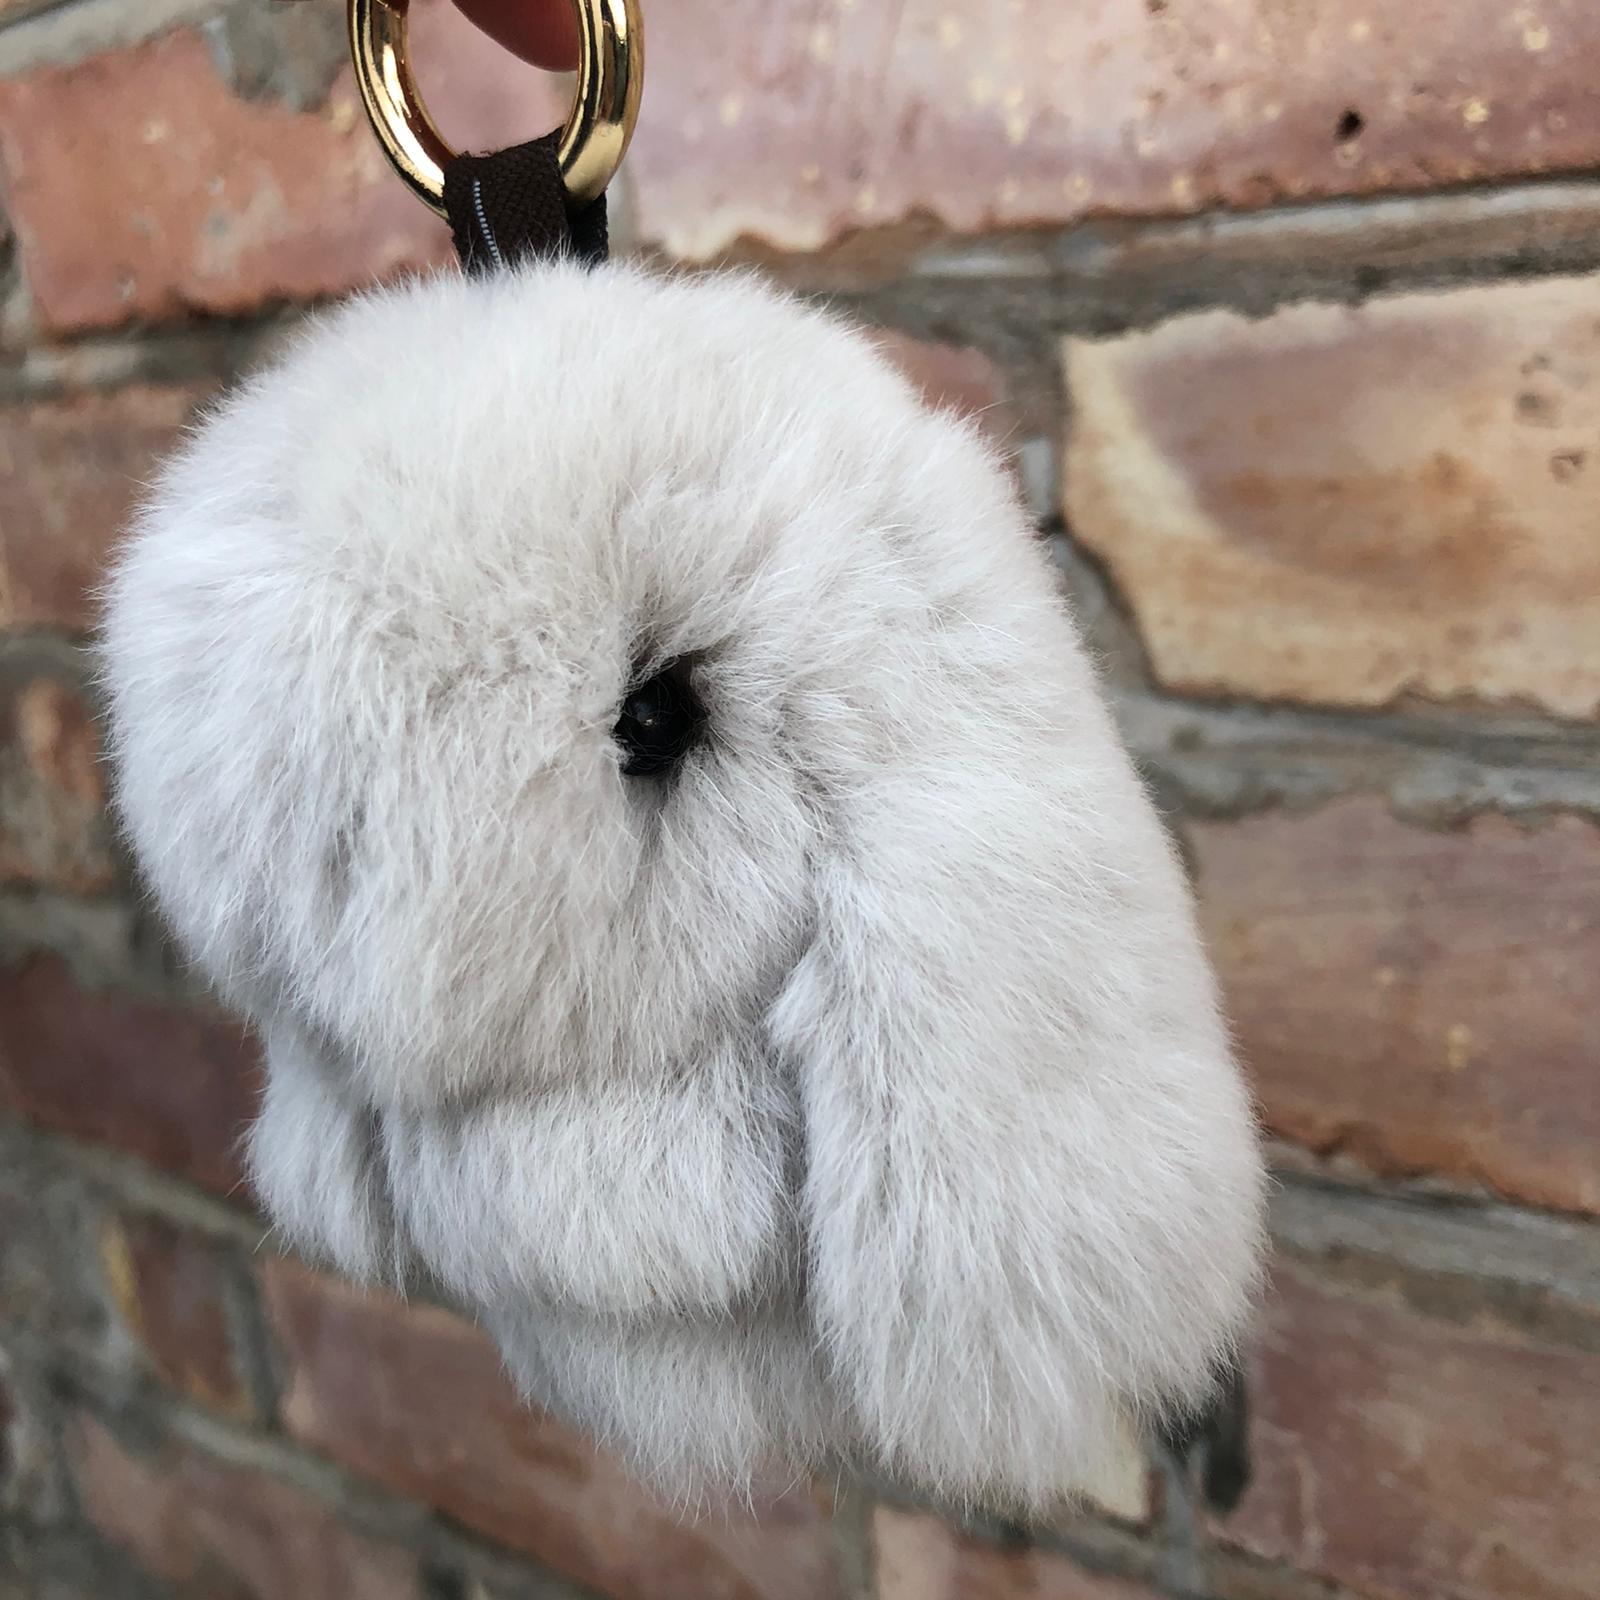 BAGAHOLICBOY SHOPS: 10 Year Of The Rabbit Bags & Bag Charms - BAGAHOLICBOY